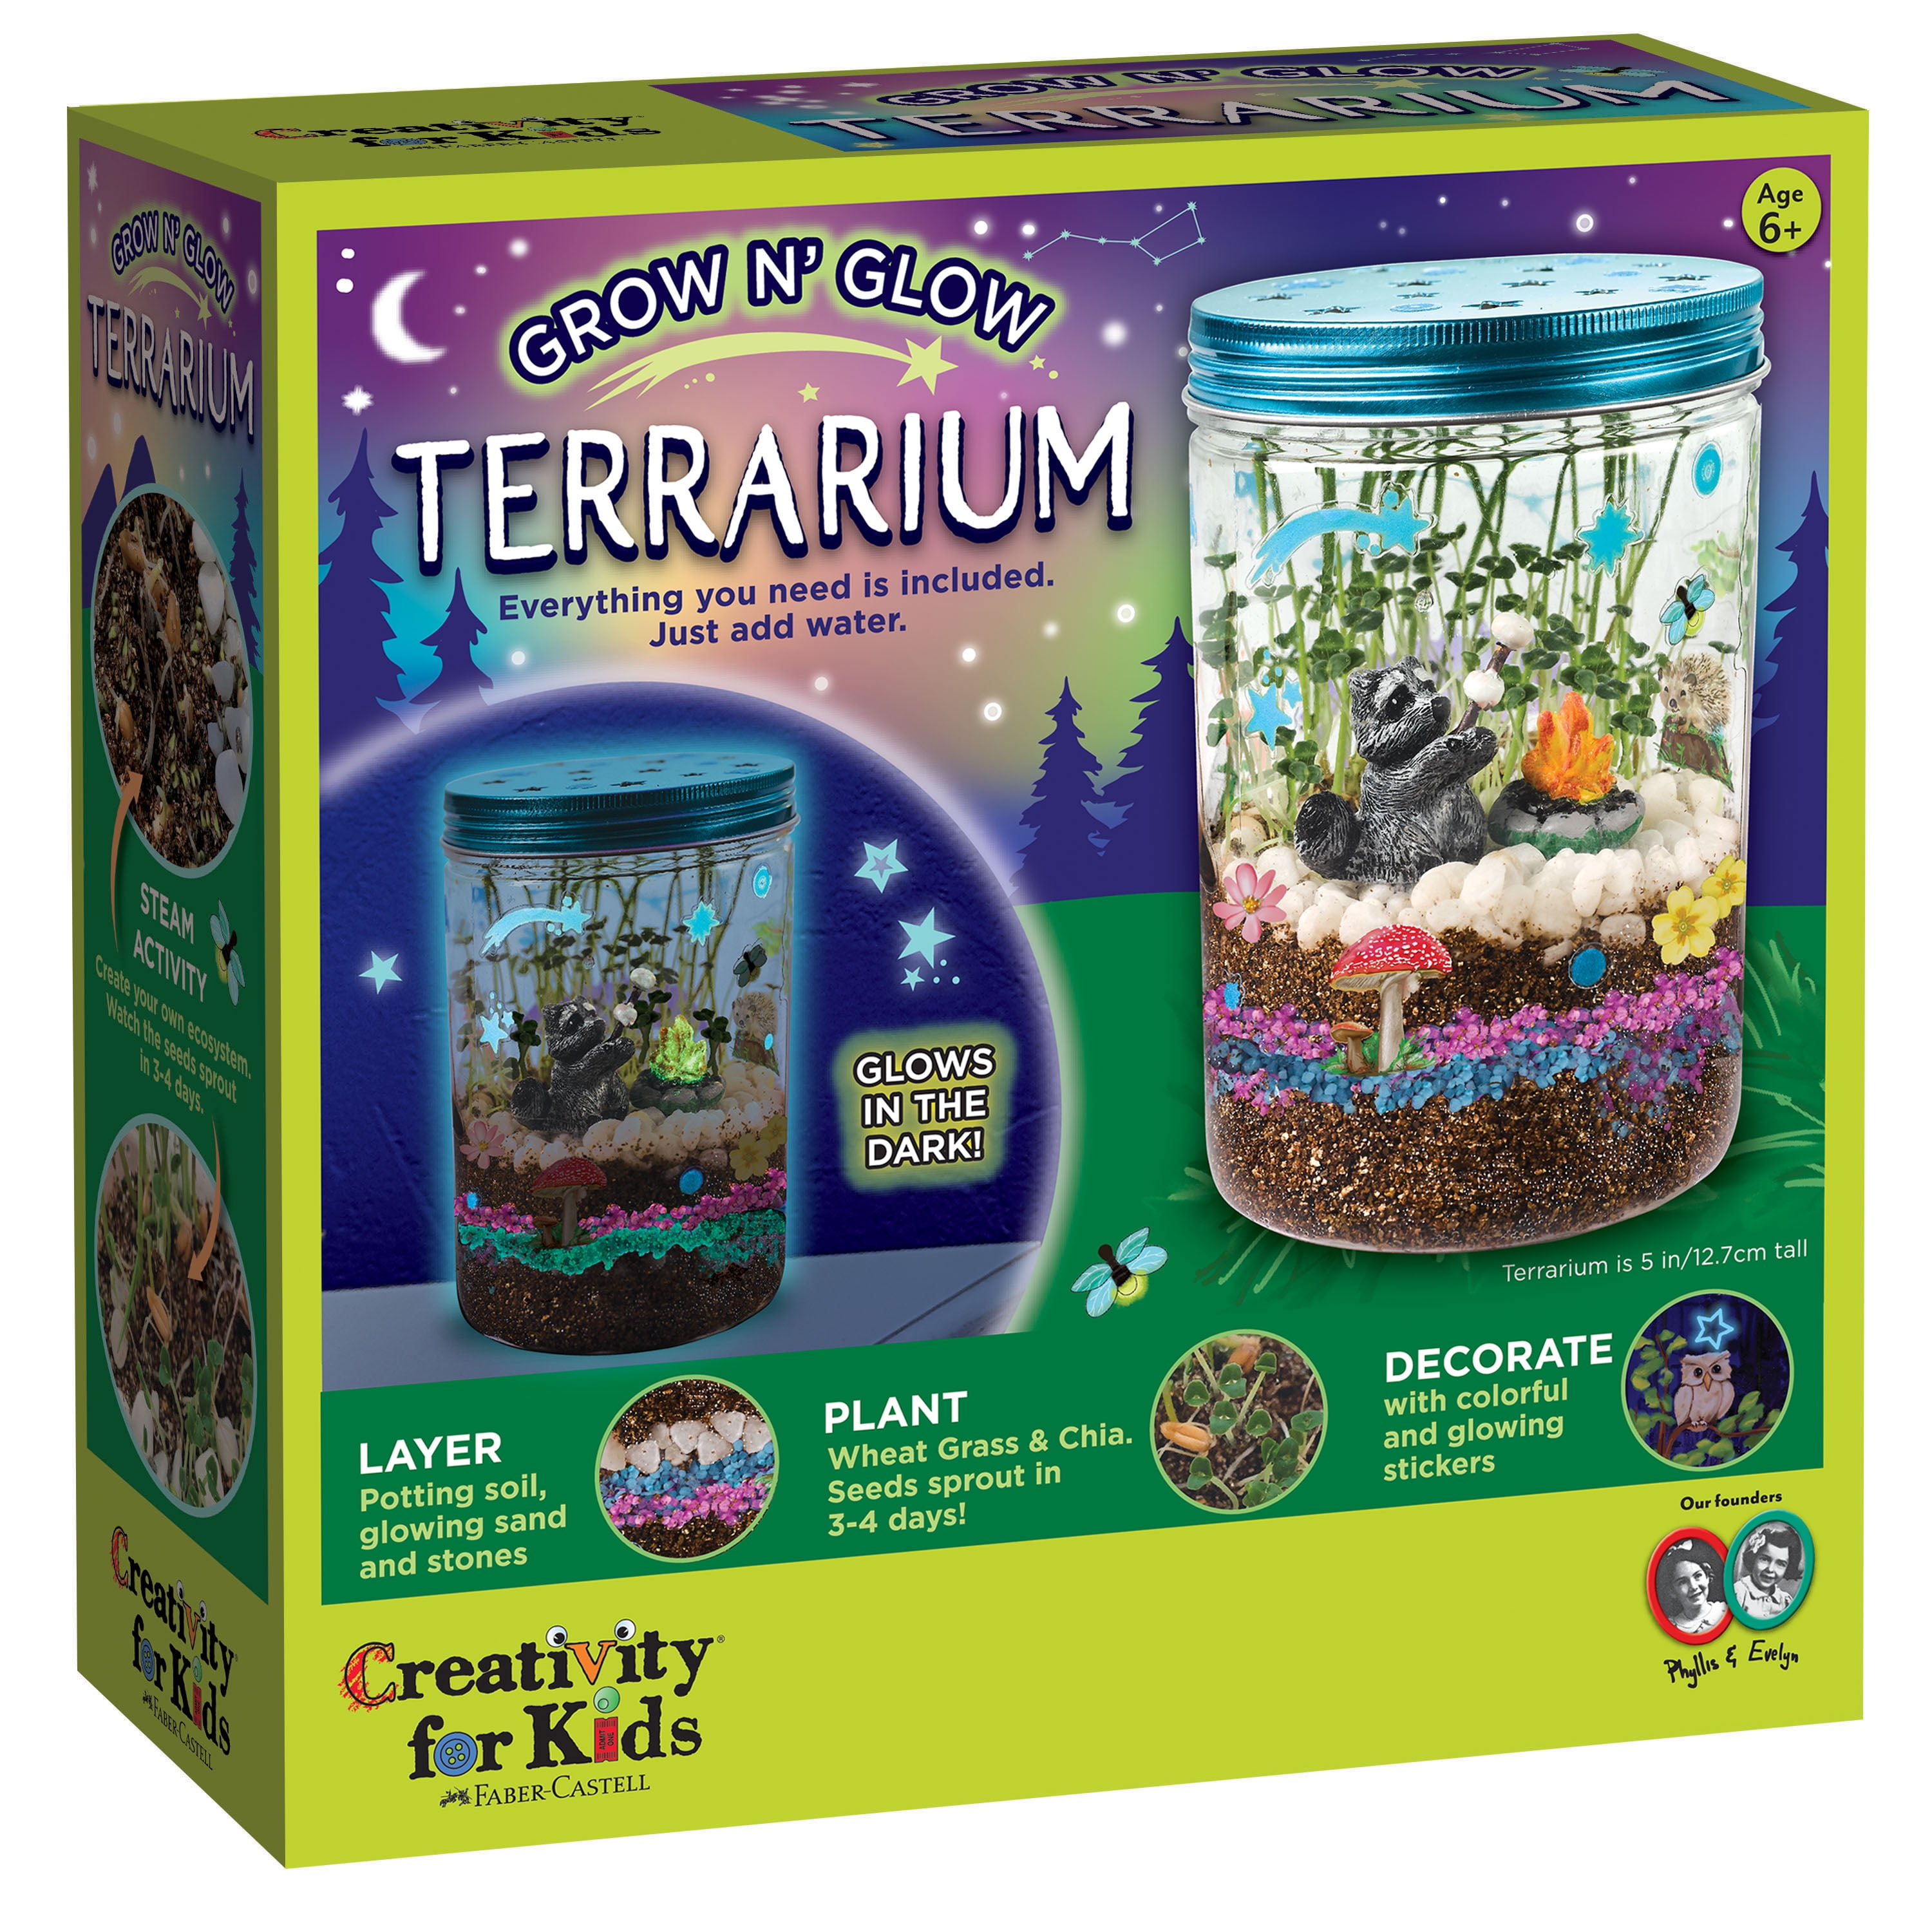 Grow Butterfly Terrarium Sparkling Stickers Plant Seeds Stones Sand Science Kit 